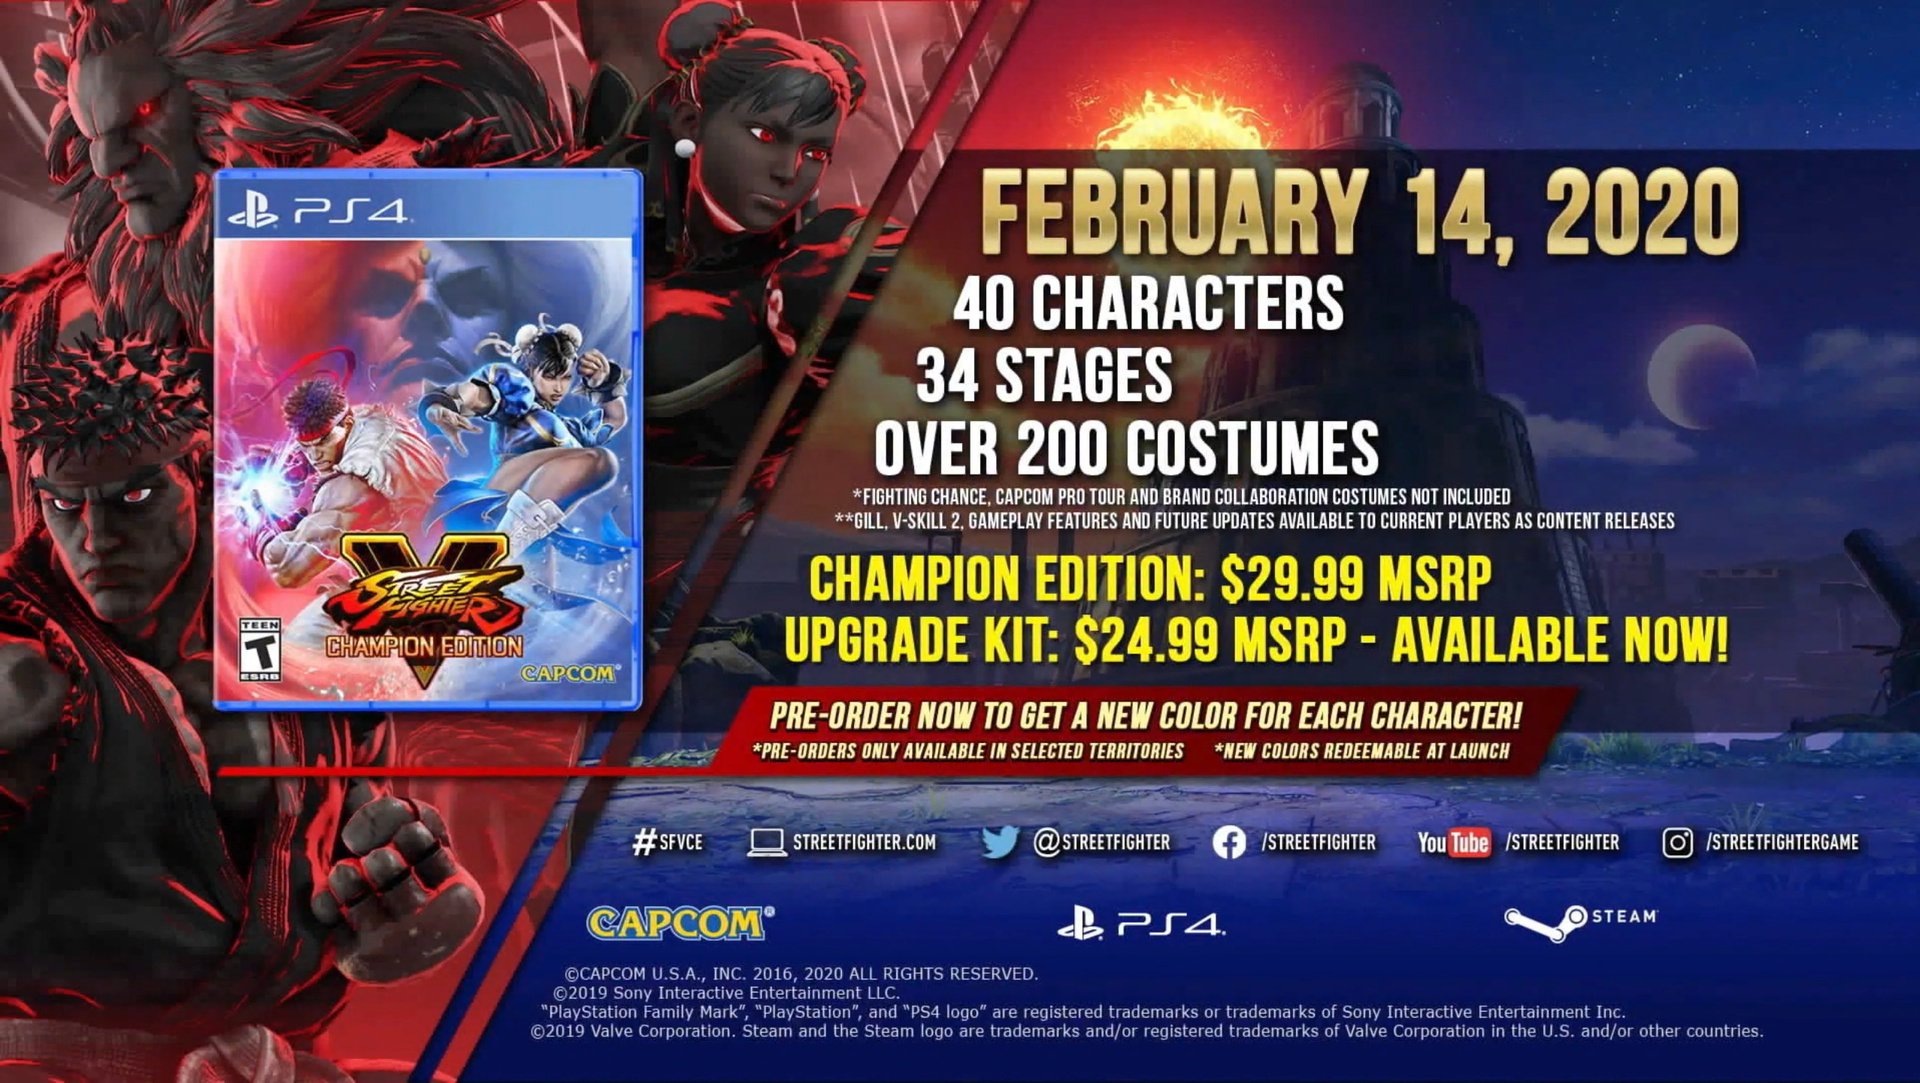 Street Fighter V: Champion Edition announced alongside DLC character Gill